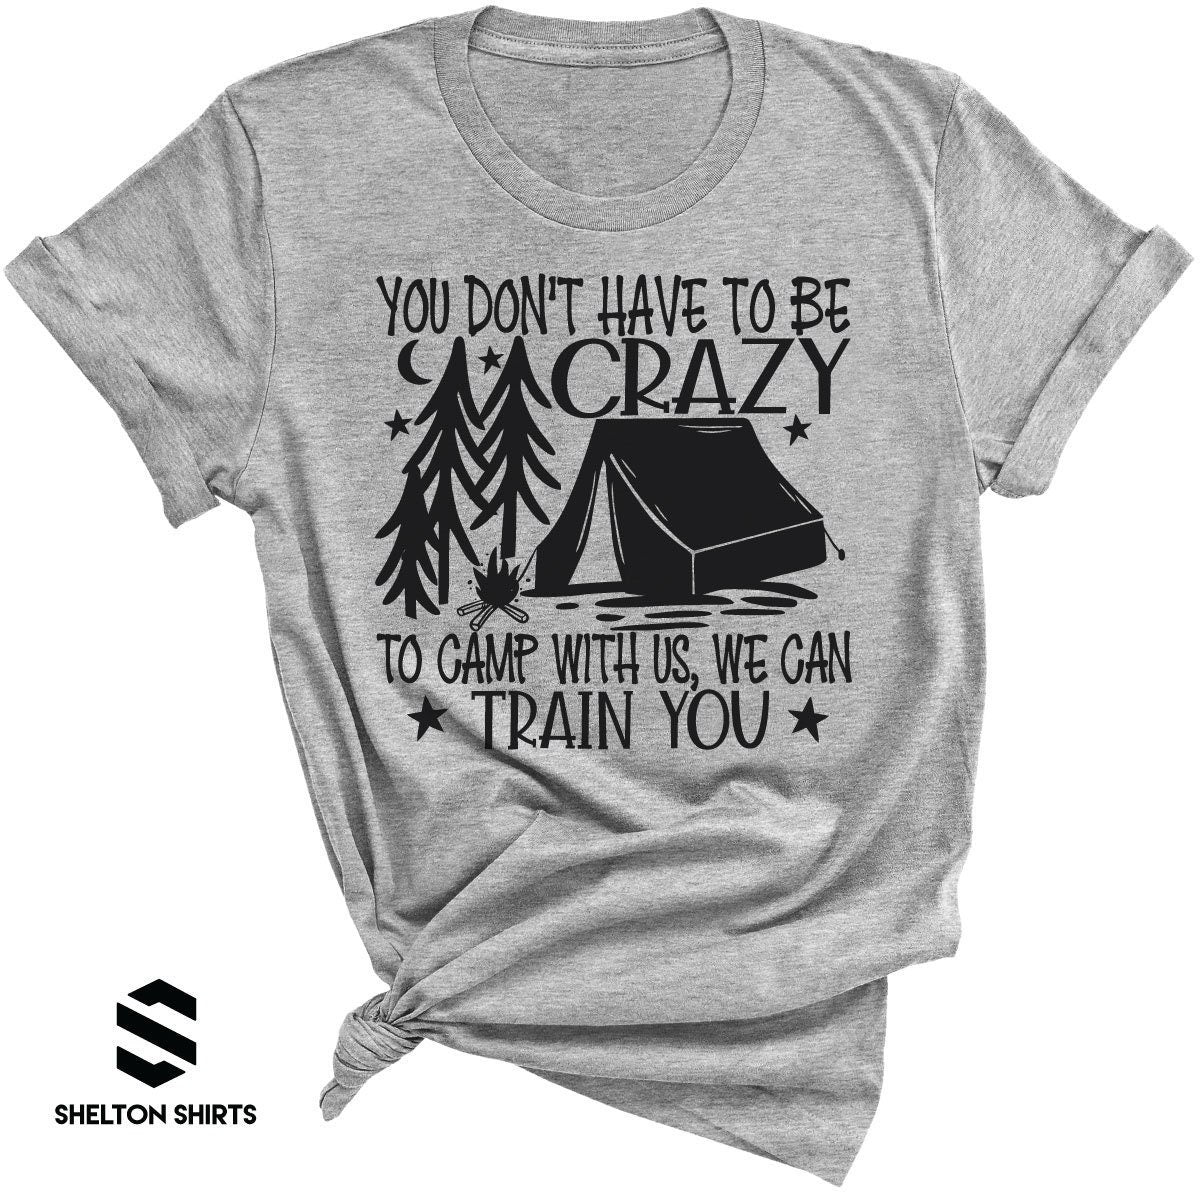 to – don\'t train camp have with can crazy Funny SheltonShirts we T-Sh to You you be us